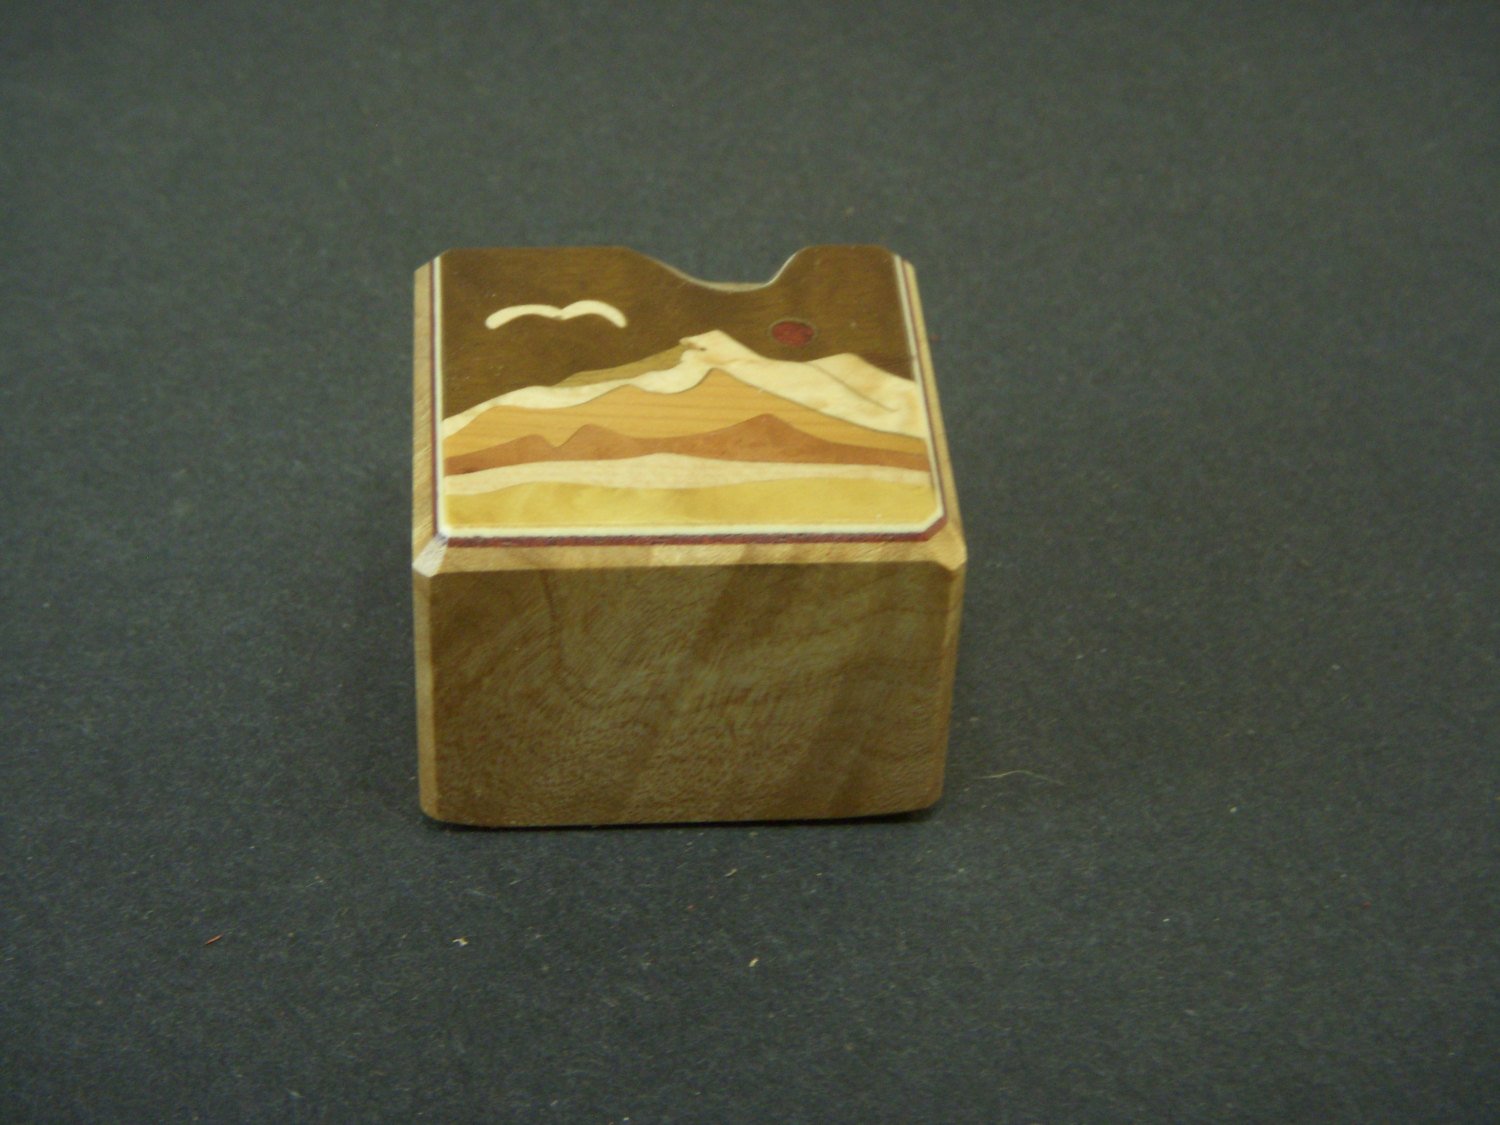 Paperweight, Retirement Gift, Colleague Gift, office Paperweight, Wood Inlay Handmade in USA